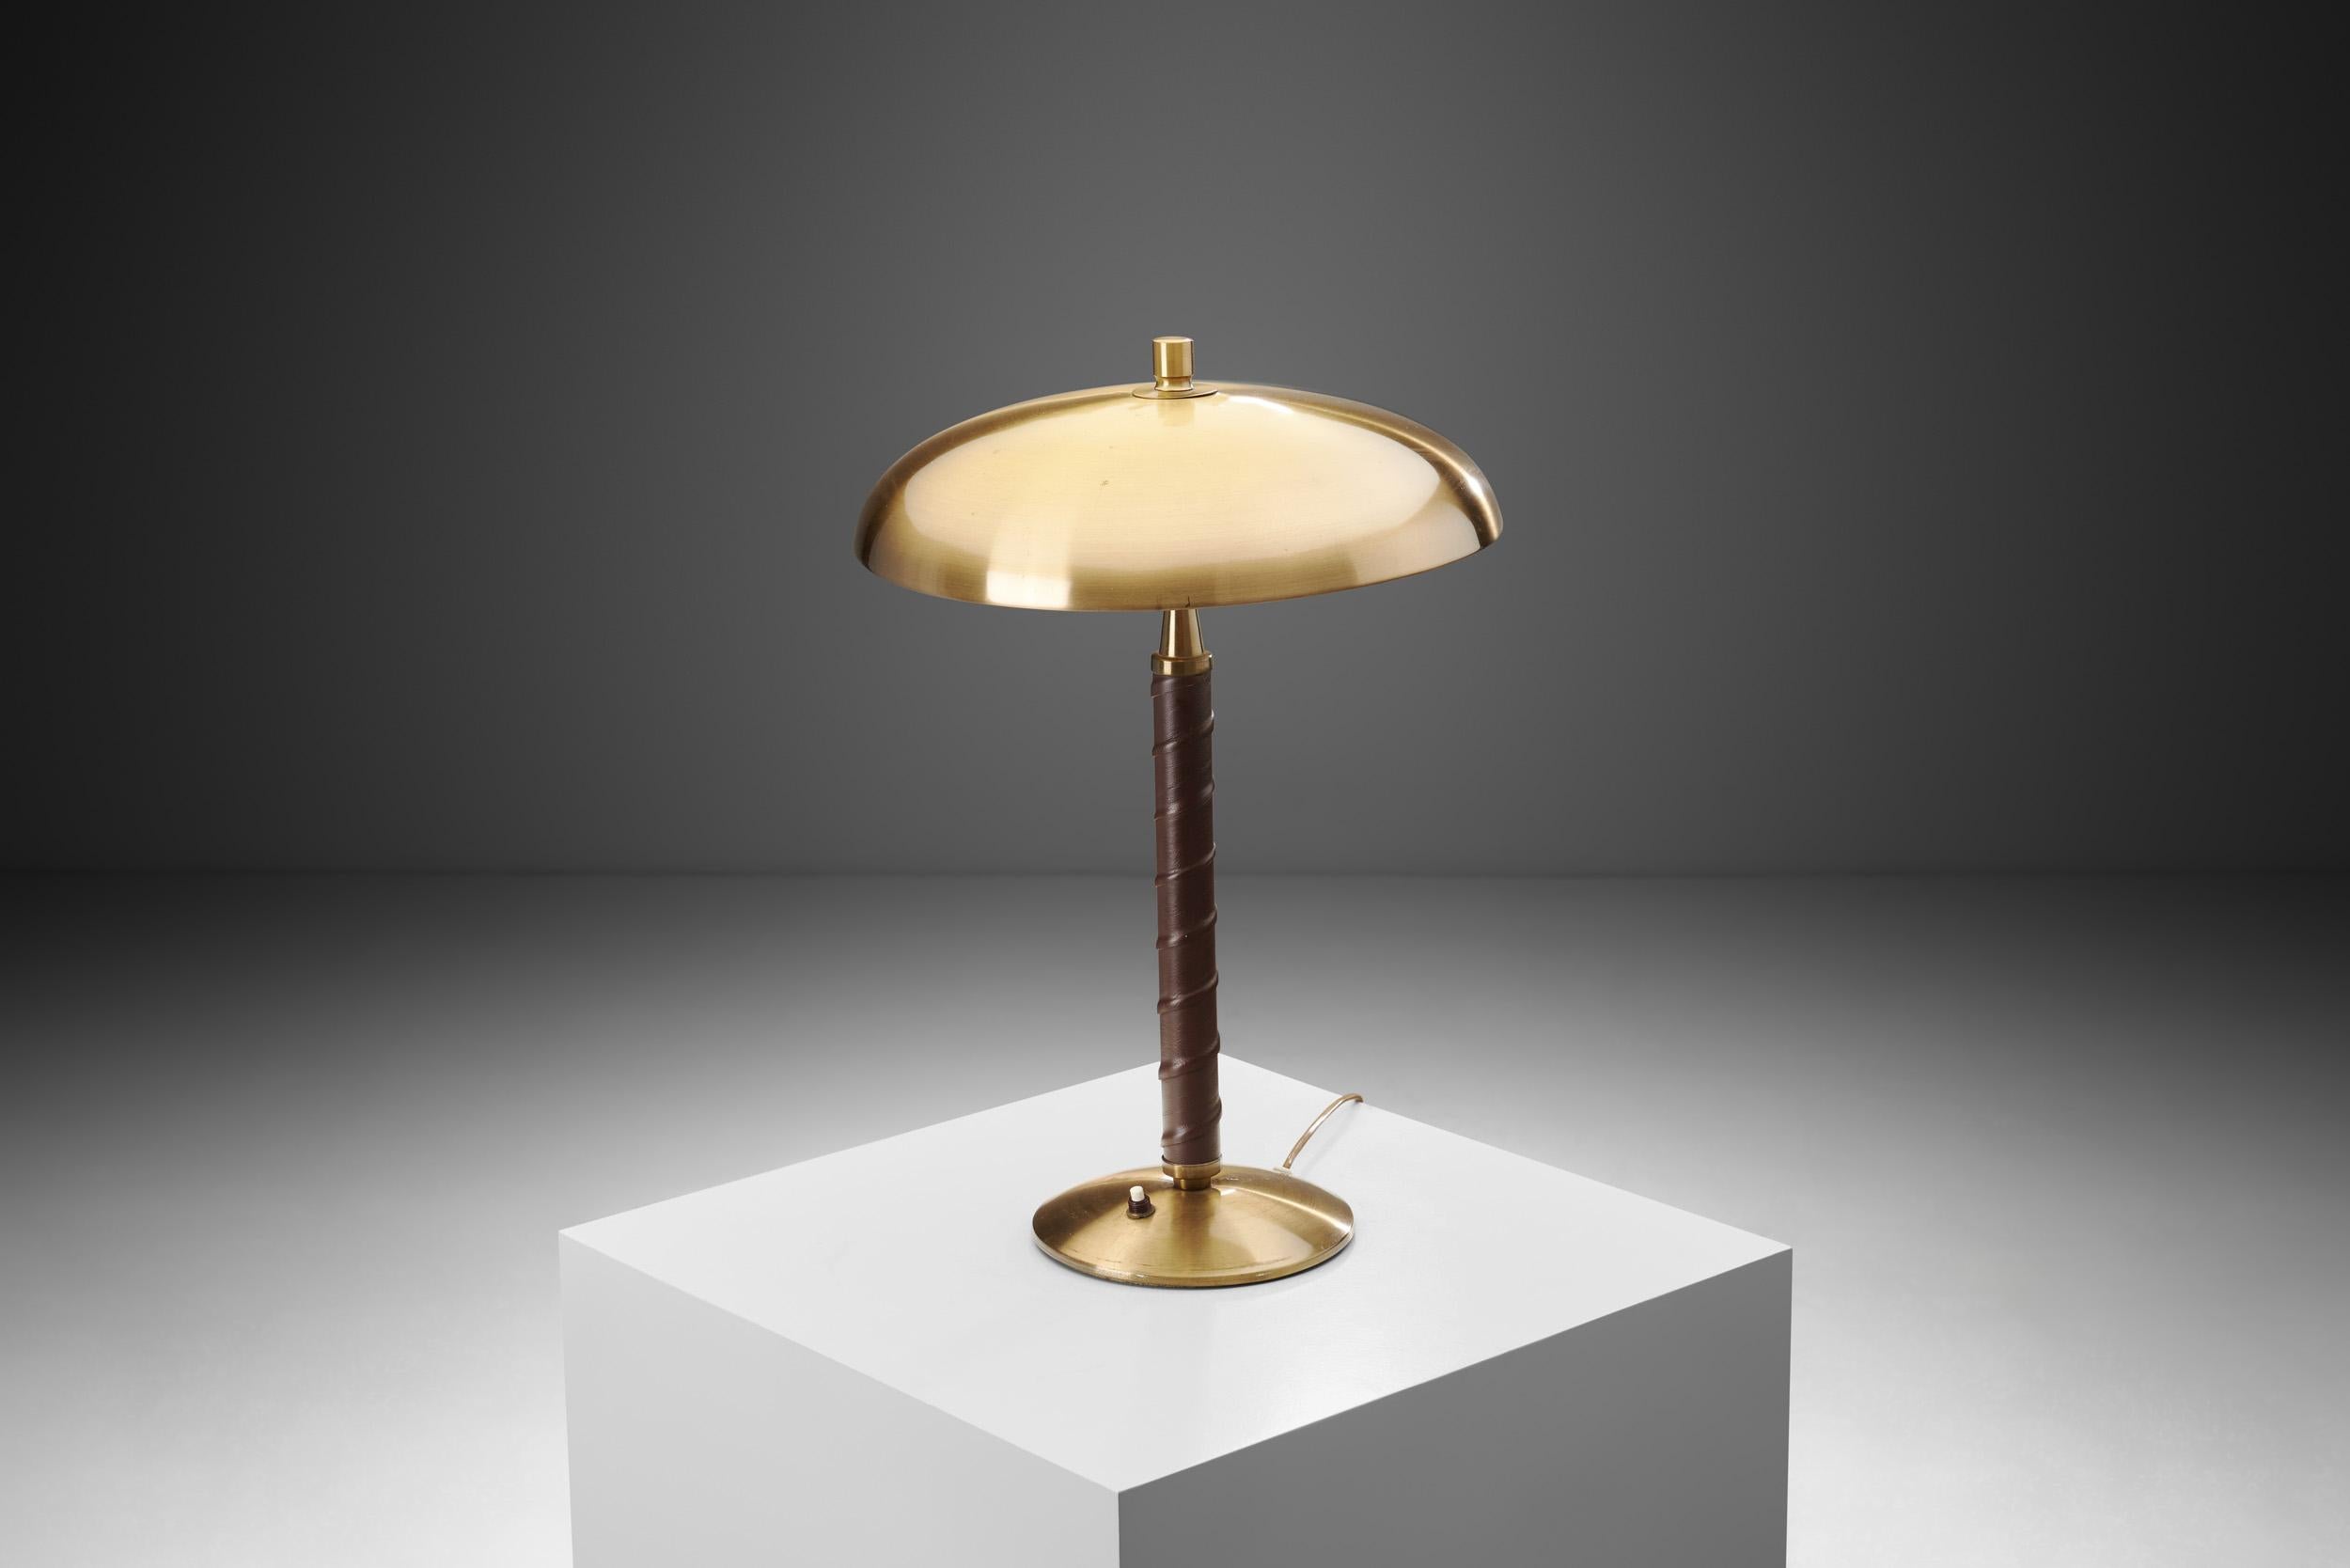 This stylish table lamp is a delightfully distinctive model, with immediately recognizable details. According to the Museum of Malmö, Einar Bäckström founded his workshop in 1918 for the manufacture of lighting and ornaments, and as the museum